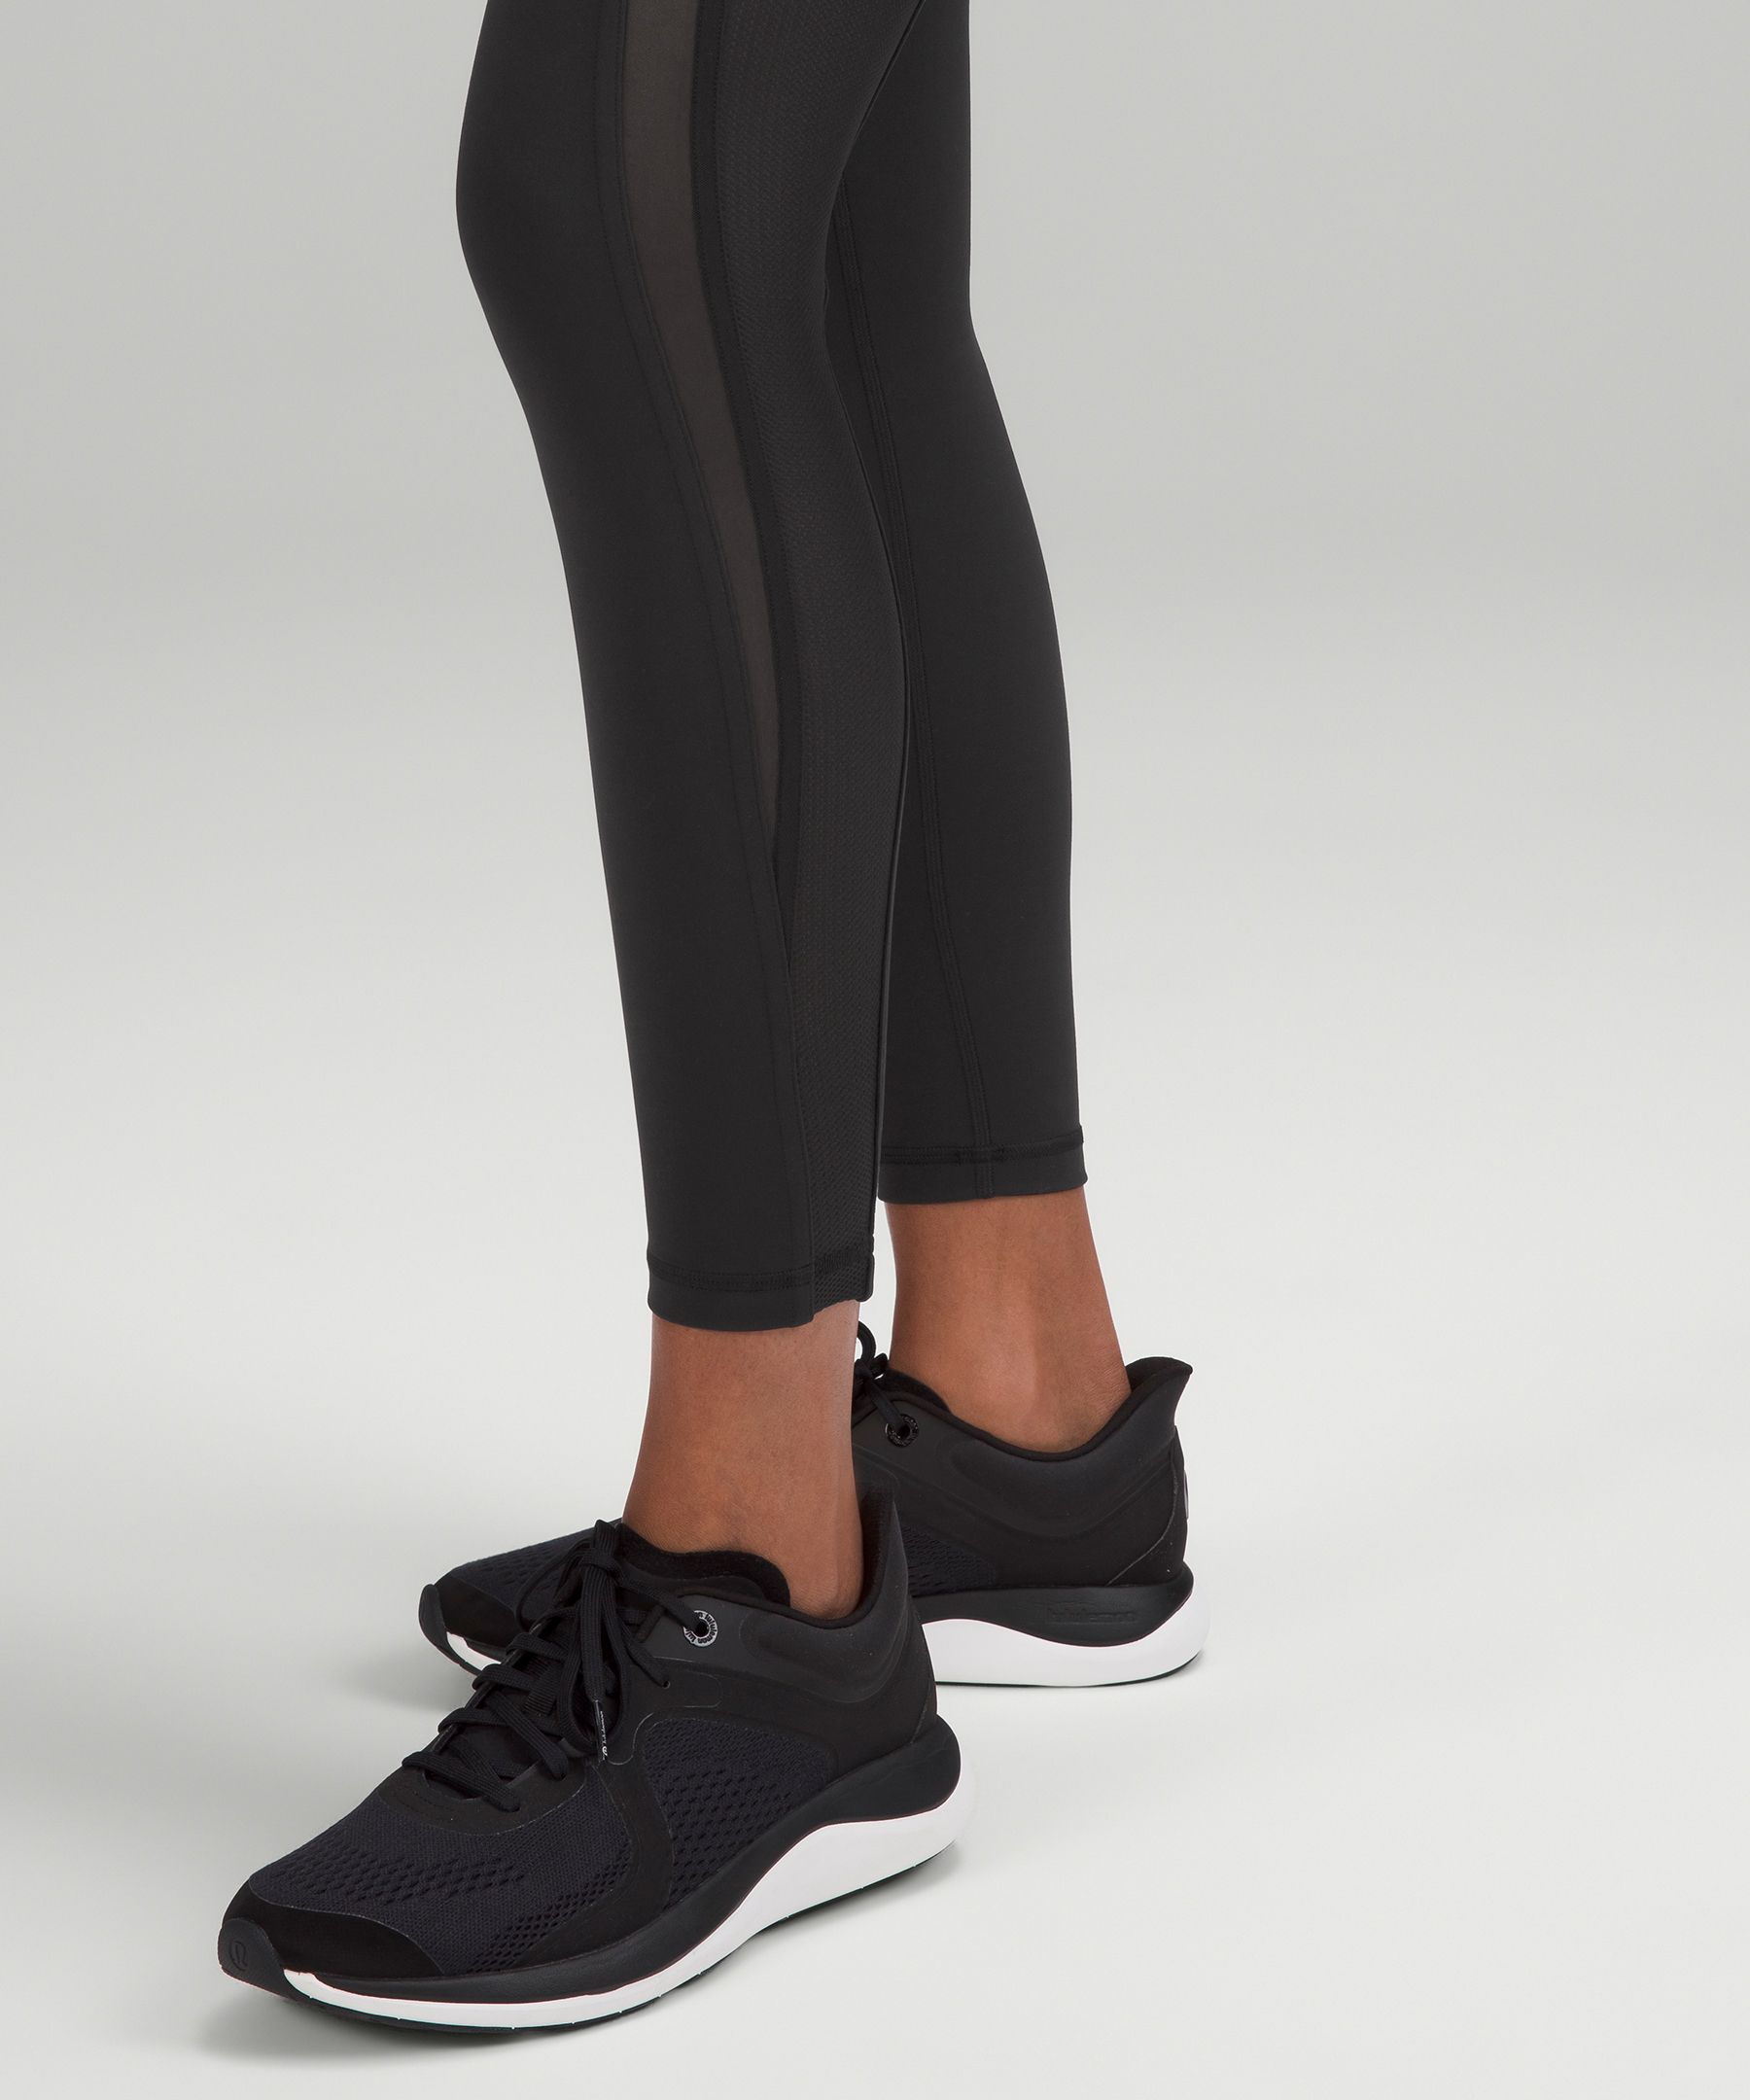 Lululemon Inspire Tight II (Mesh) - Heathered Black / Very Light Flare /  Deep Coal Gray Size 4 - $46 (64% Off Retail) - From revivalmdc